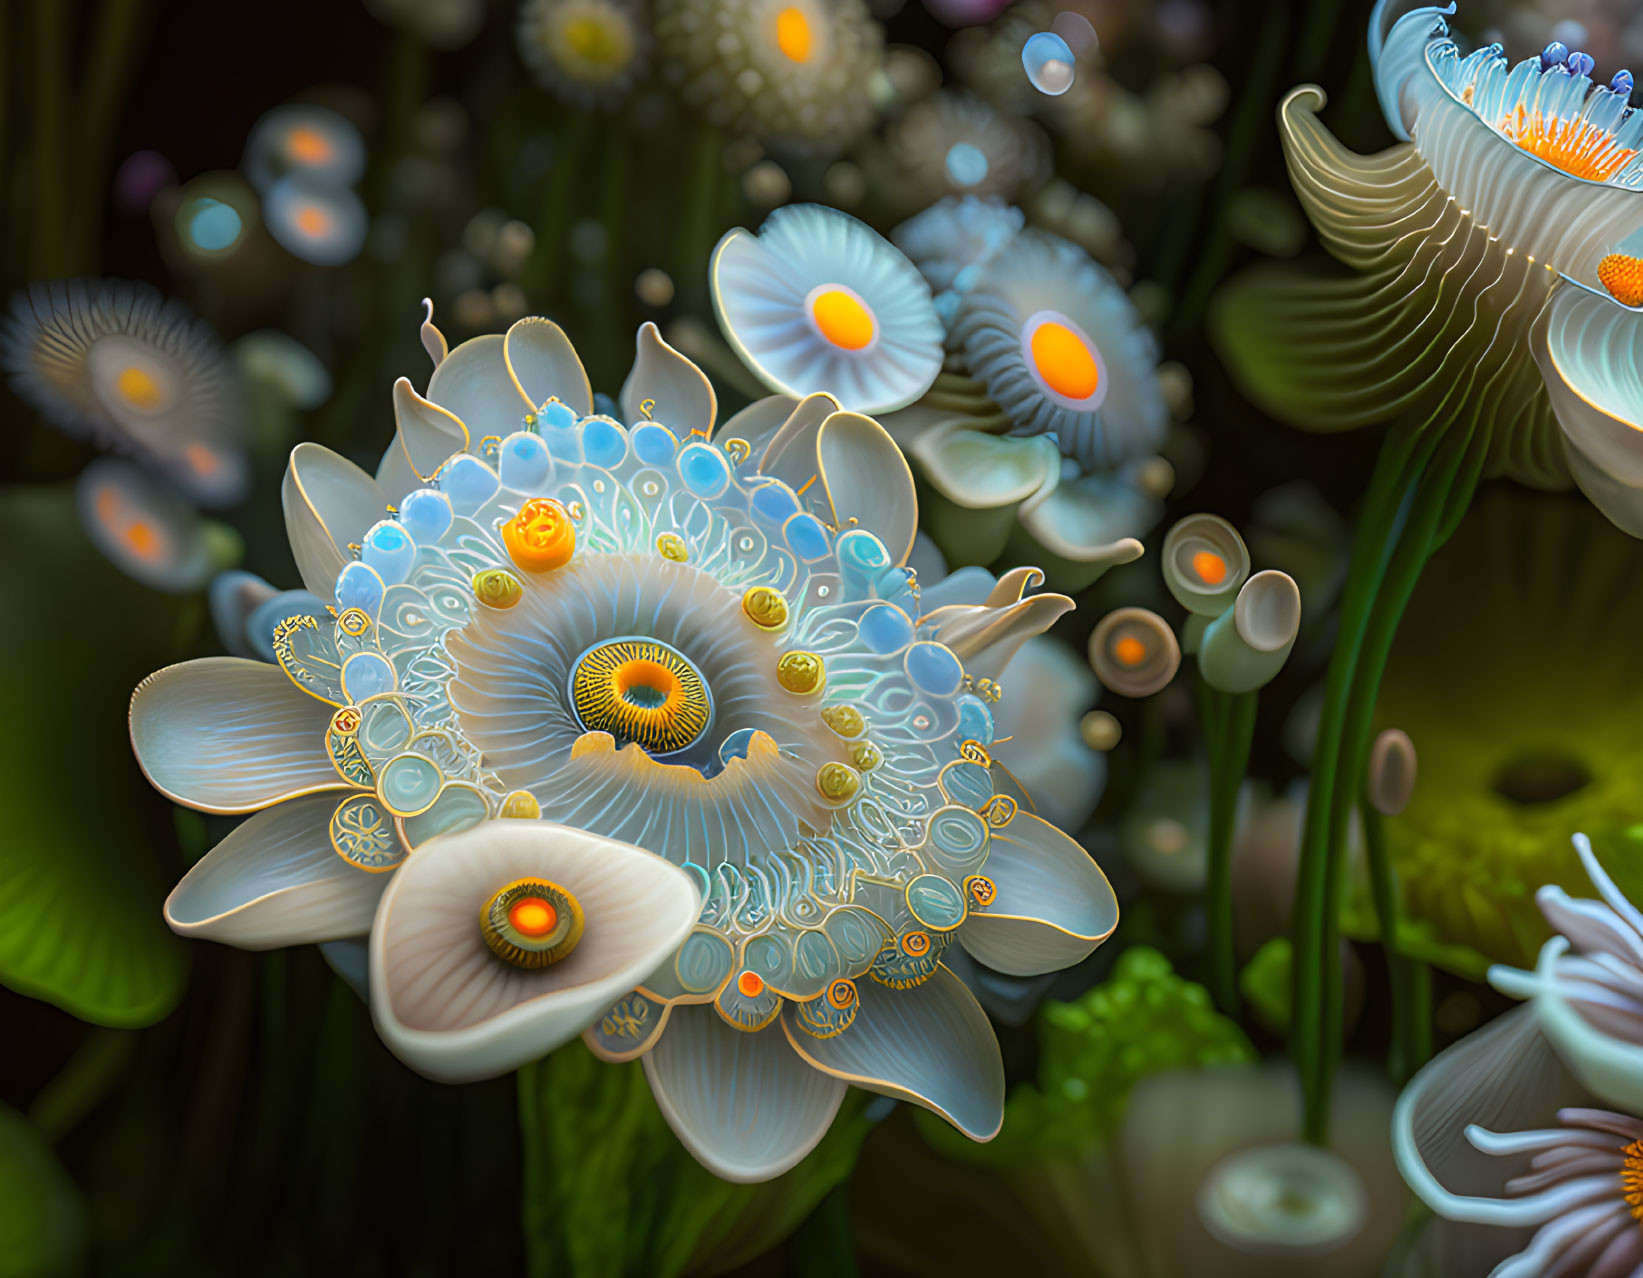 Vibrant surreal flower-like structures with intricate patterns